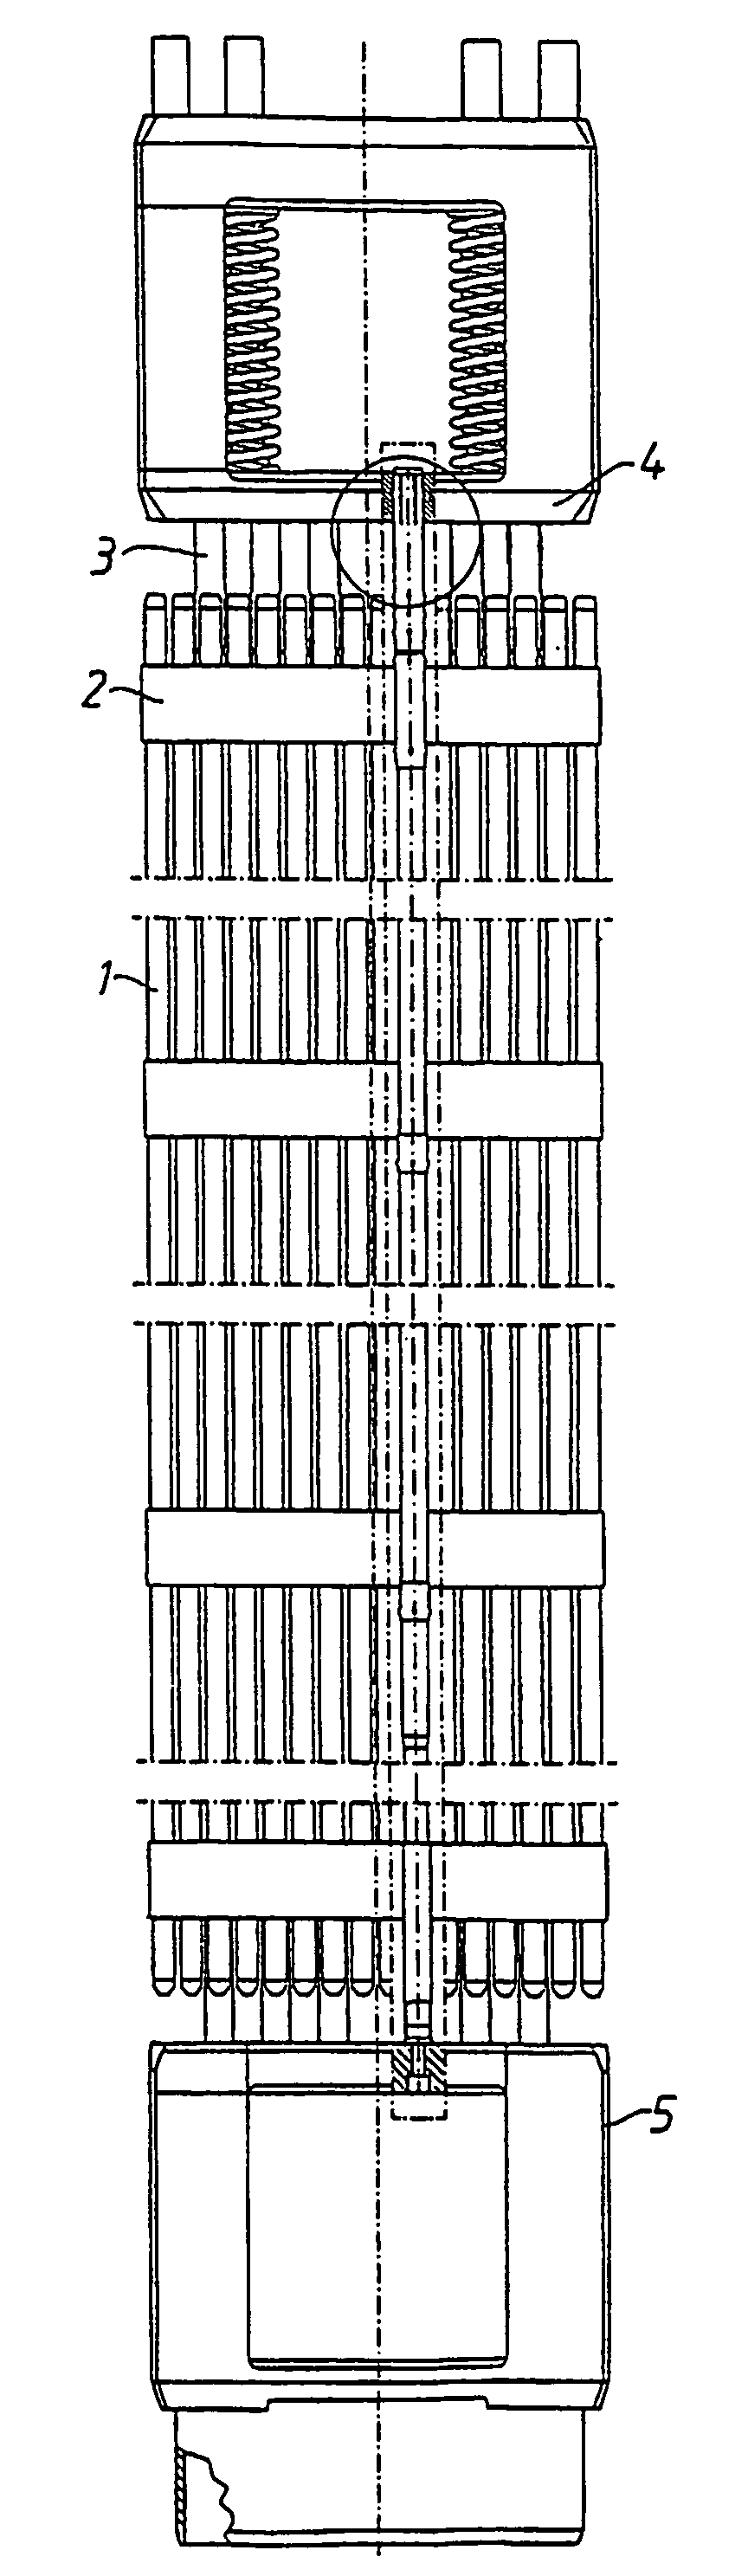 Method, use and device concerning cladding tubes for nuclear fuel and a fuel assembly for a nuclear pressure water reactor